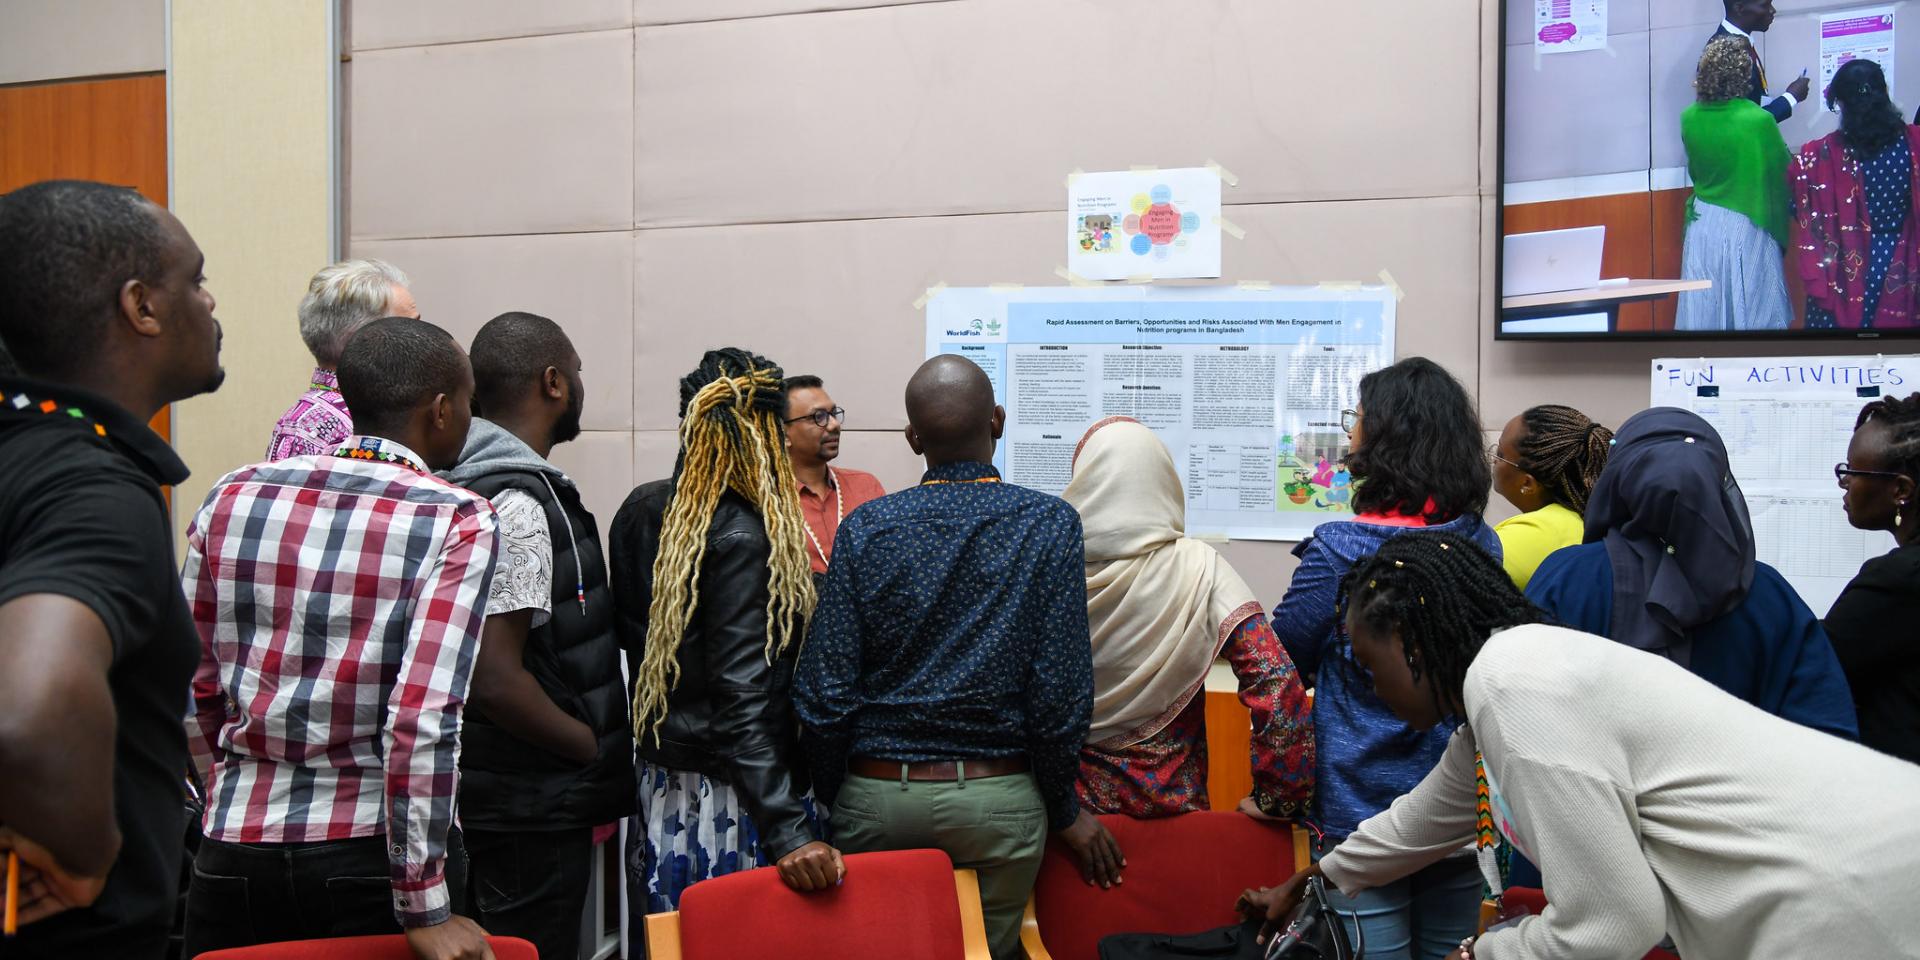 Group of people looking at researcher presenting poster